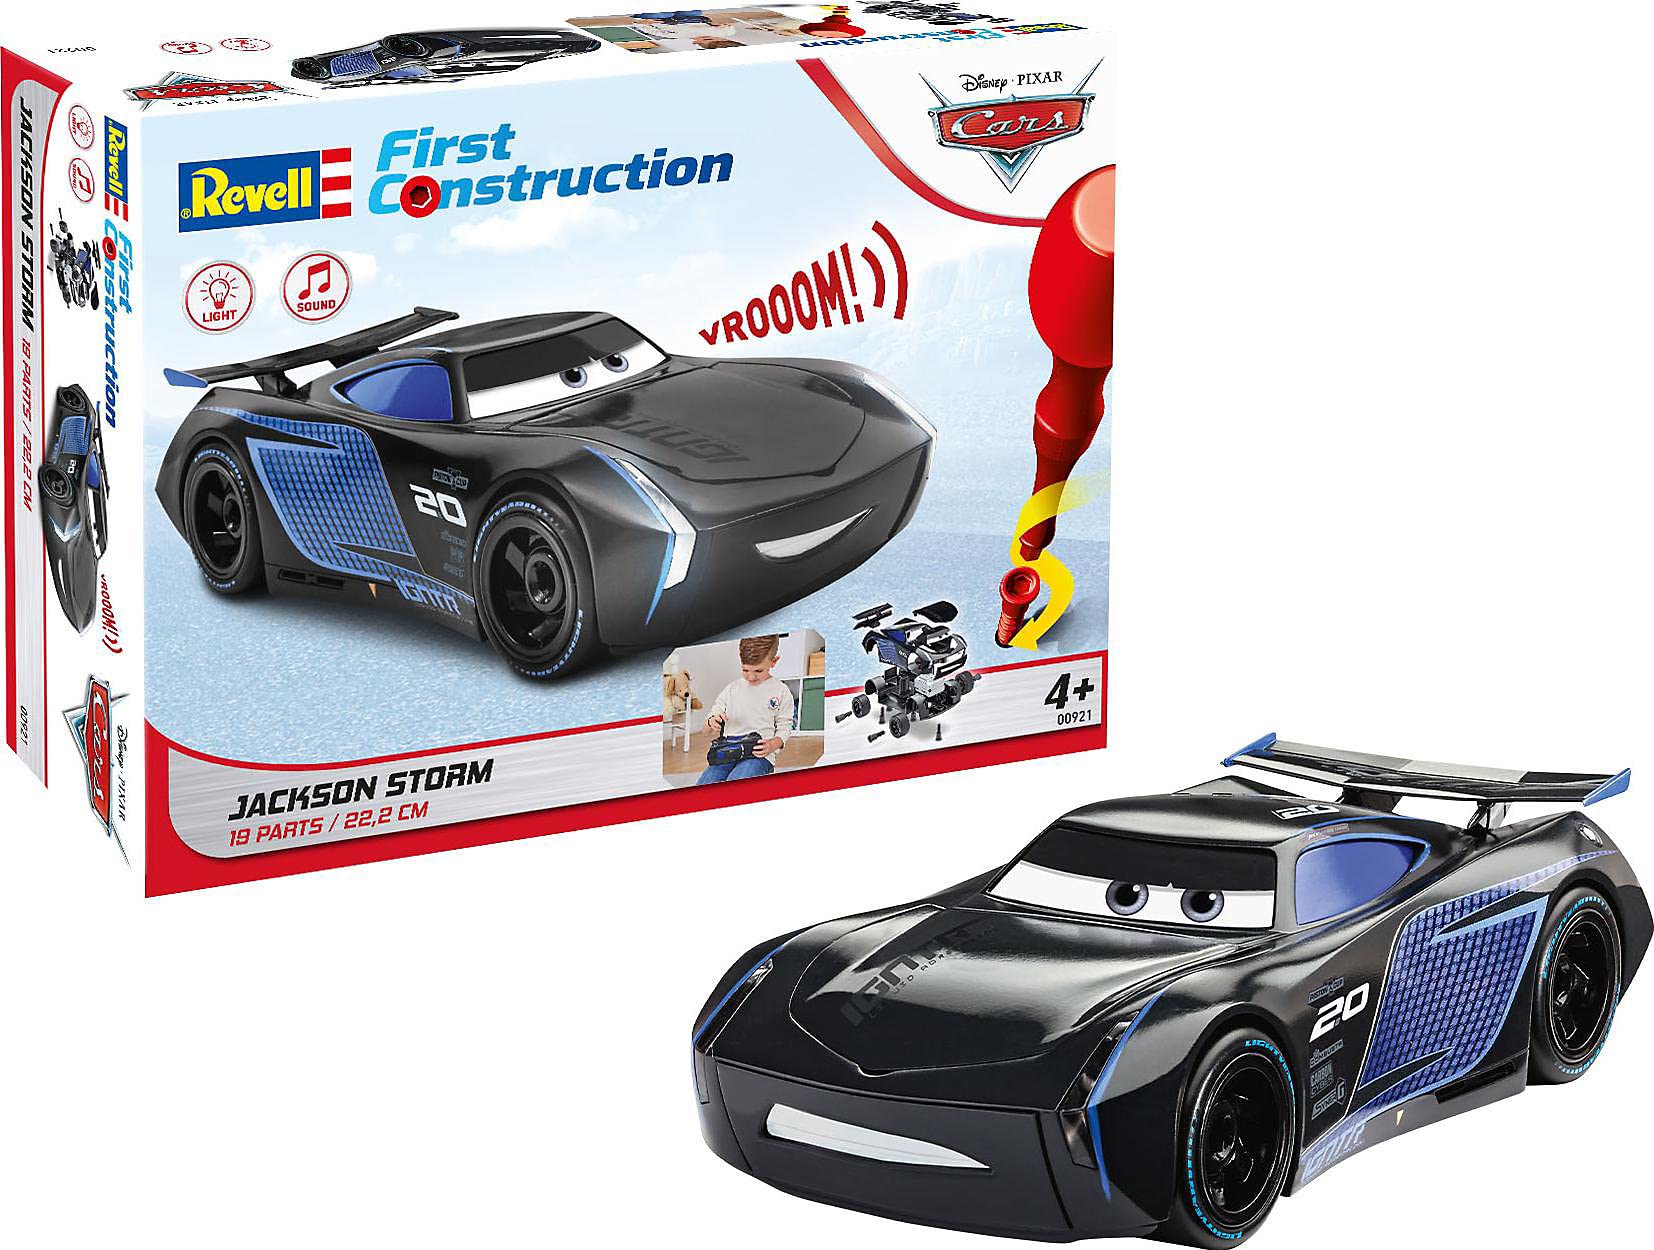 Revell of Germany Revell Cars 00921 First Jackson Storm Disney (Light & Sound) 1:20 Scale, Black